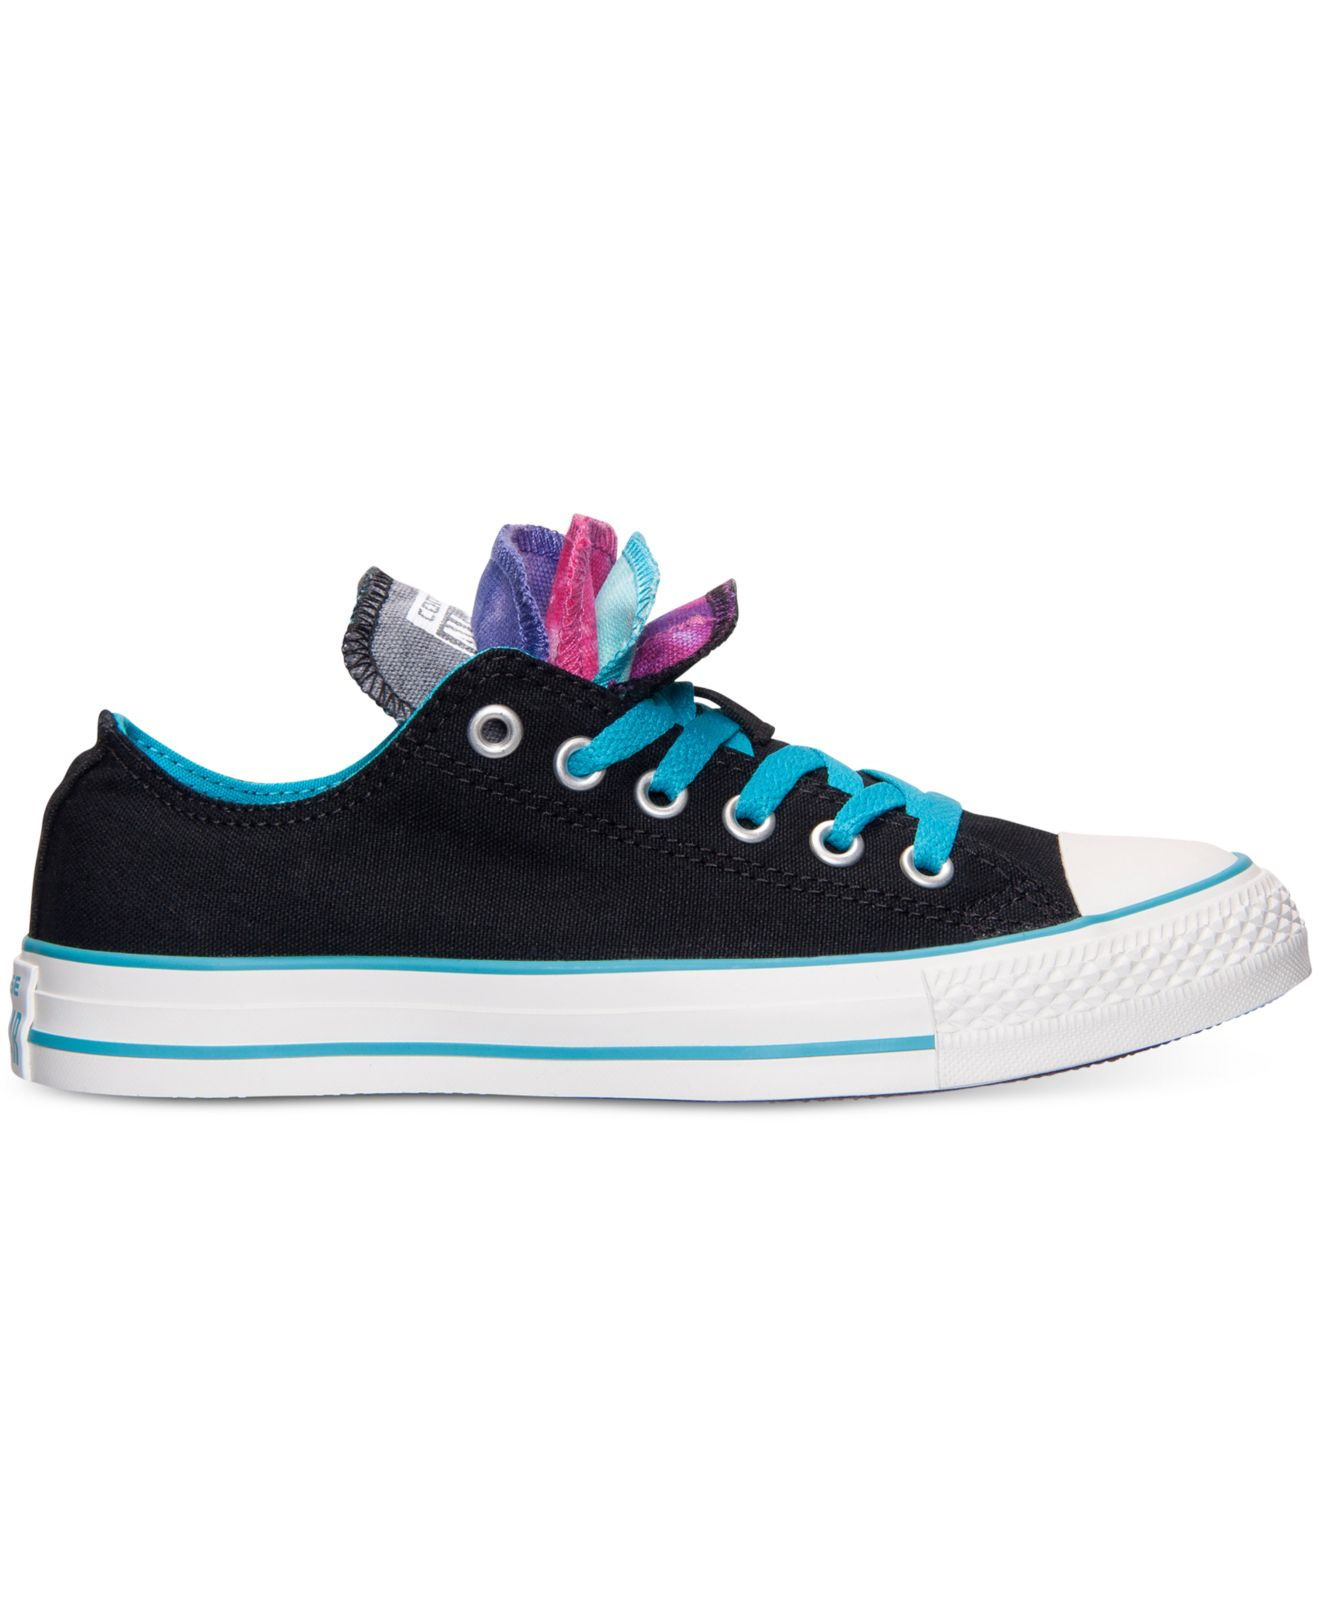 Lyst - Converse Women'S Chuck Taylor Ox Multi Tongue Casual Sneakers ...